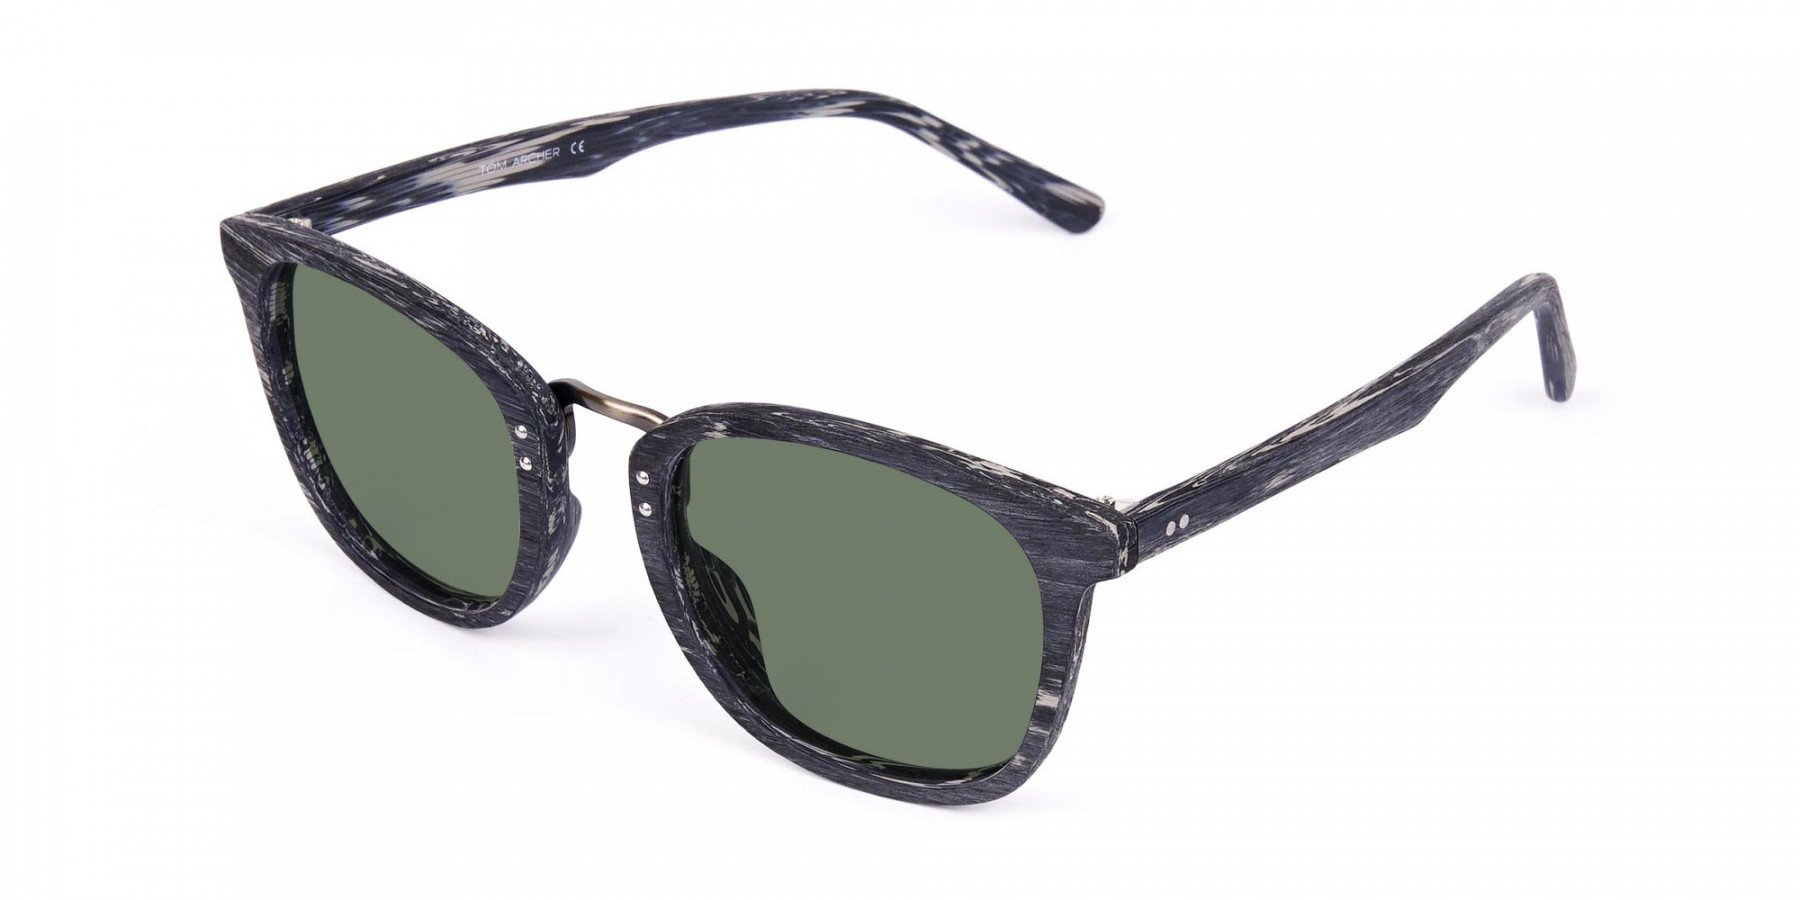 Wooden-Grey-Square-Sunglasses-with-Green-Tint-1